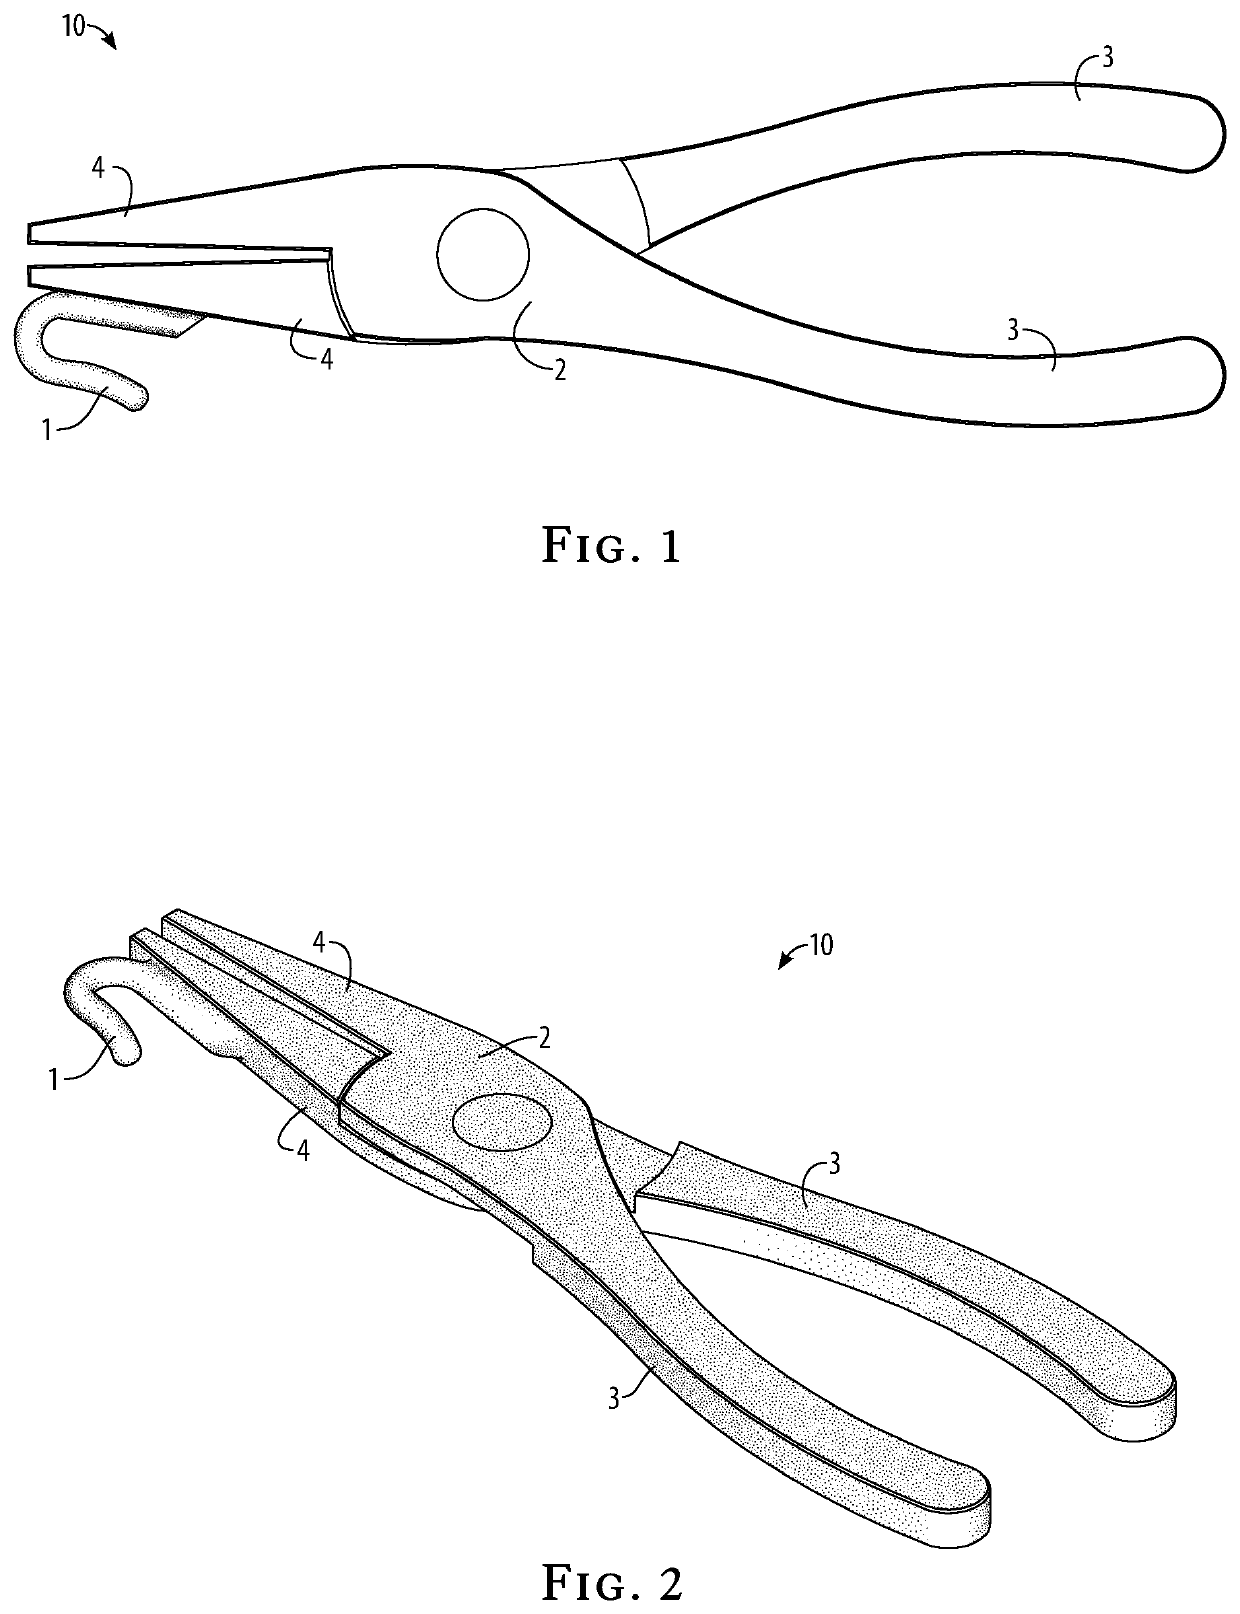 Fishhook removal device and method